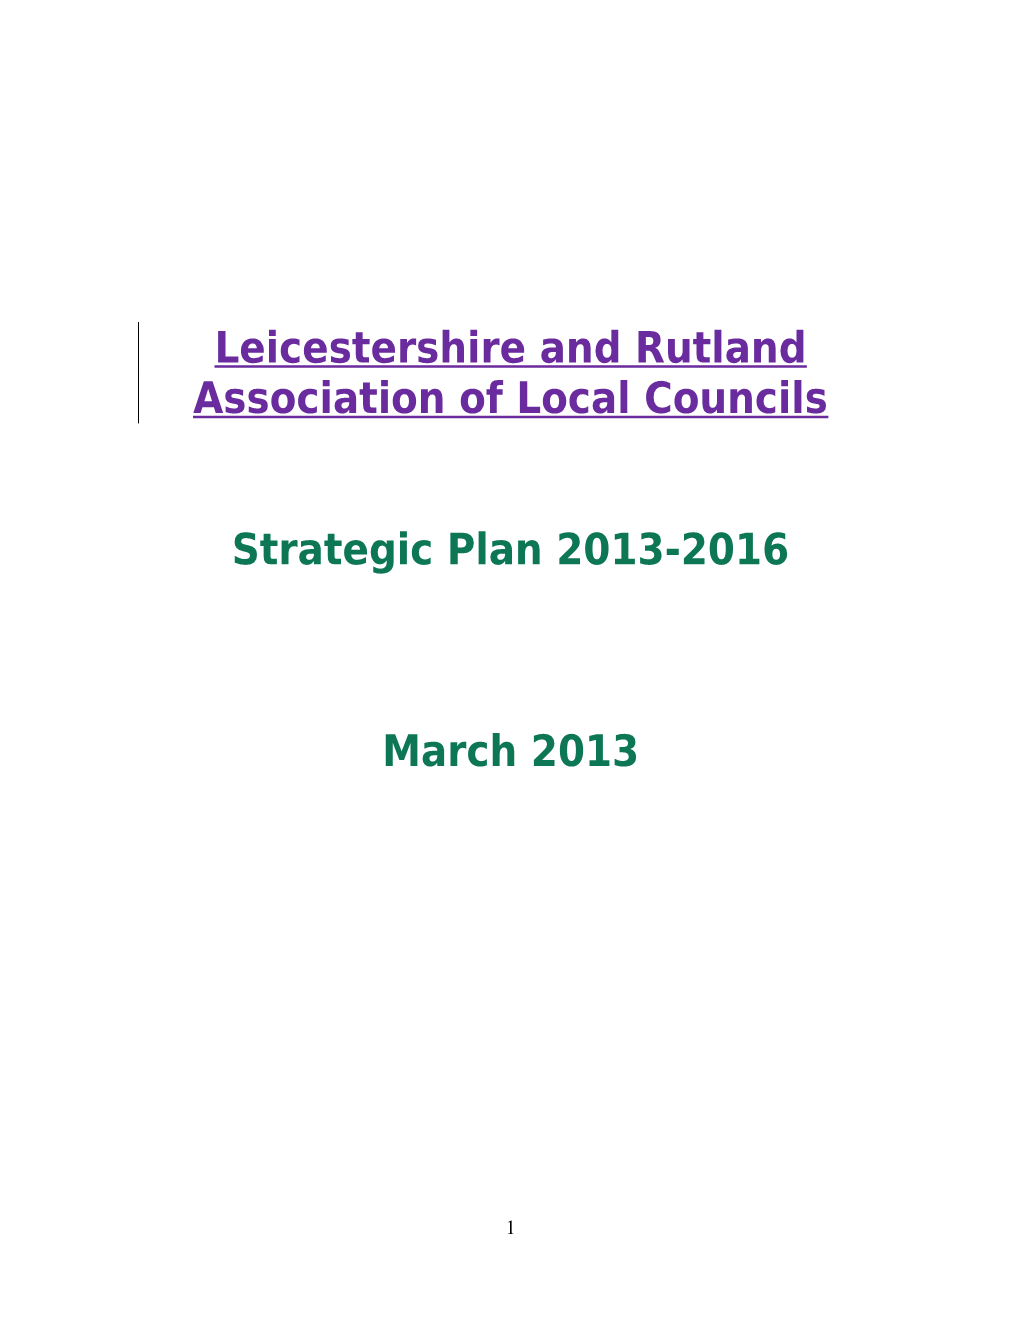 LRALC Strategic Plan Themes and Actions